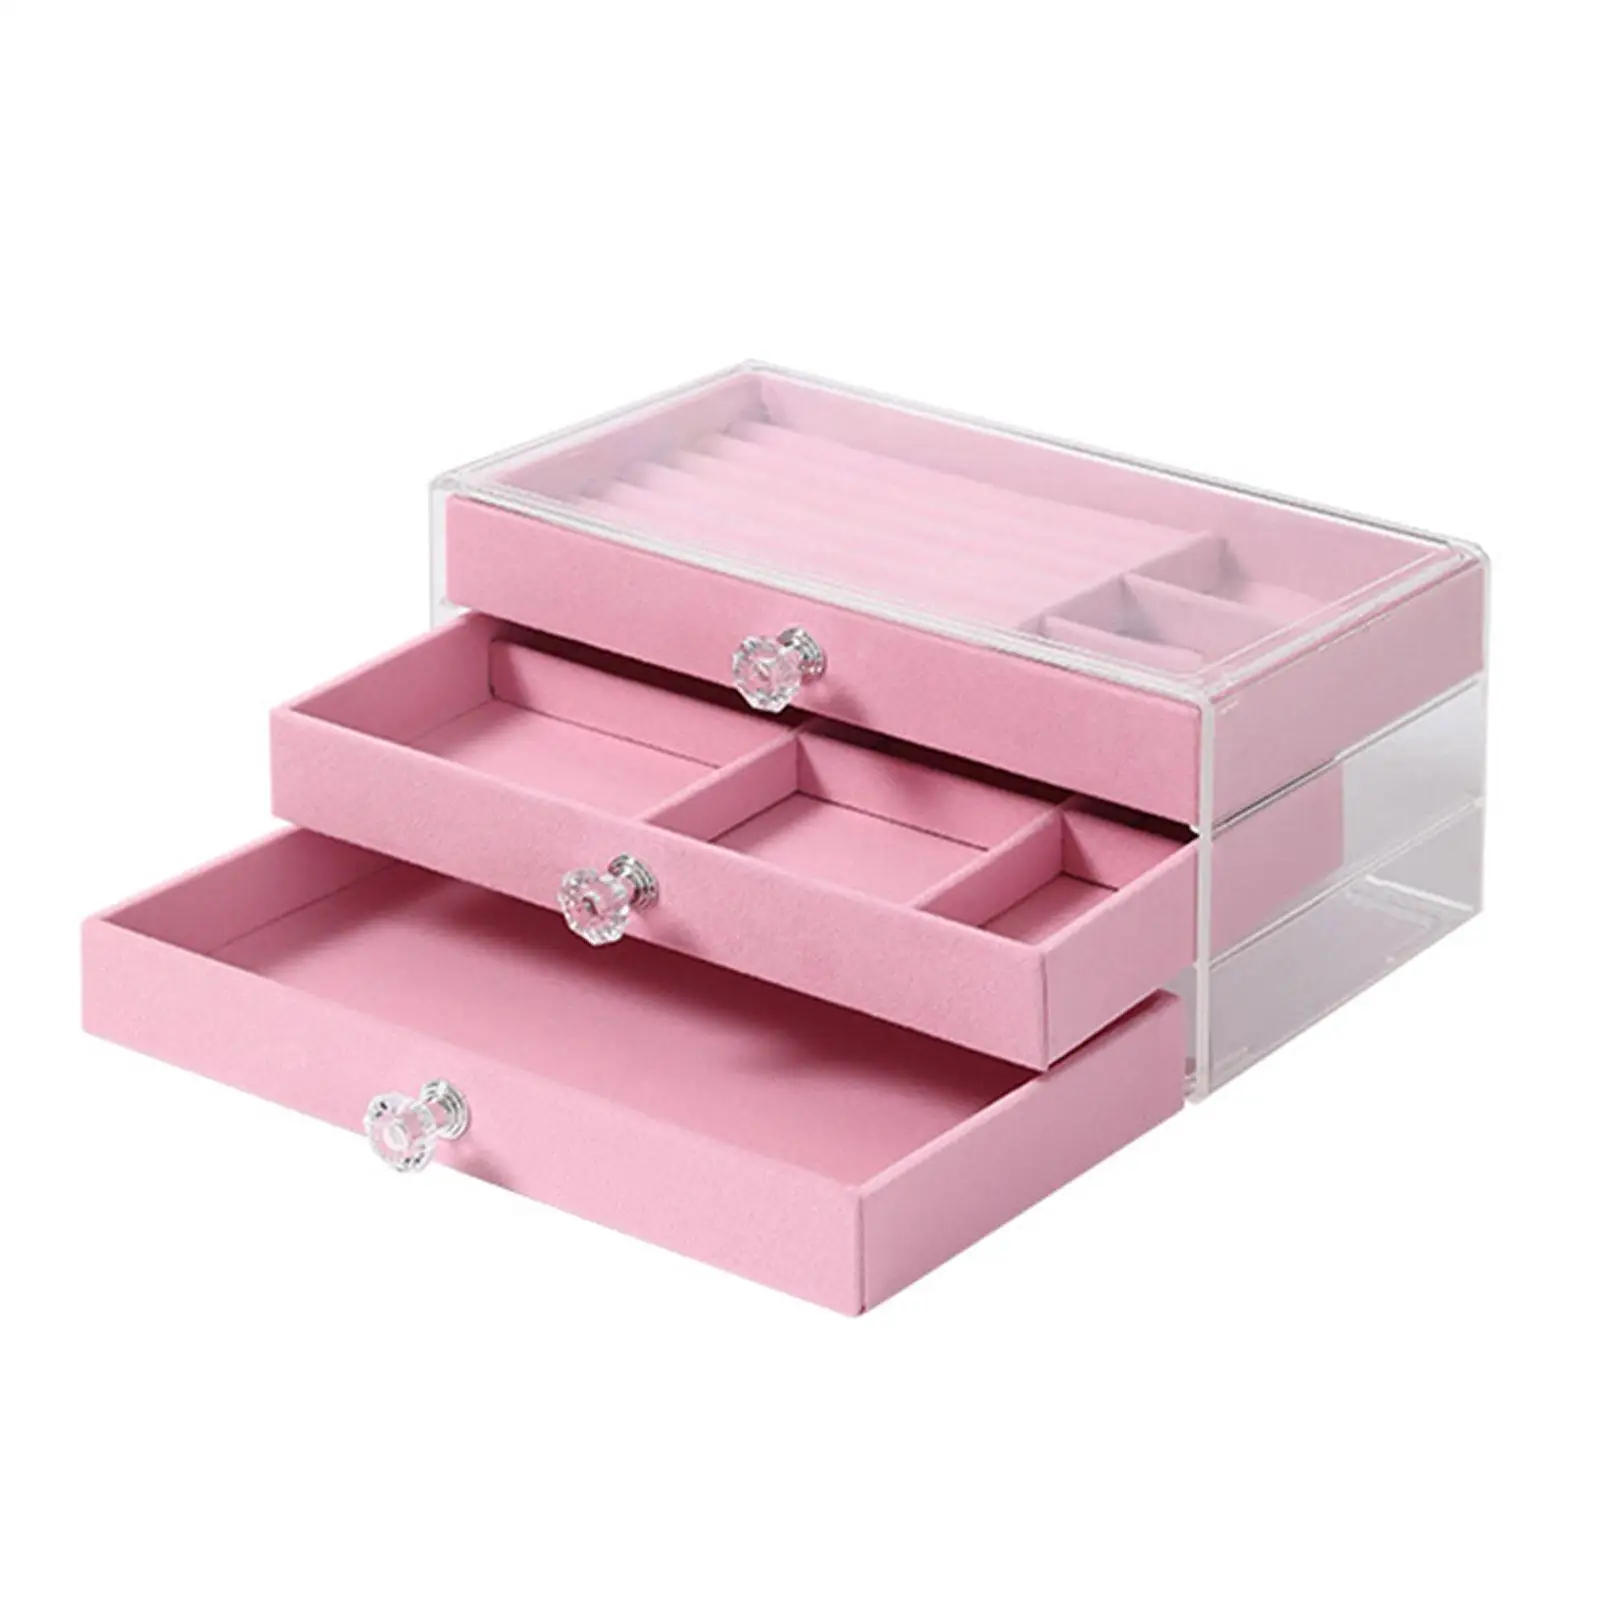 Portable Jewelry Box for Women Girls with Mirror Earrings Watches for Necklace Rings Acrylic Large Jewelry Organizer Home Travel